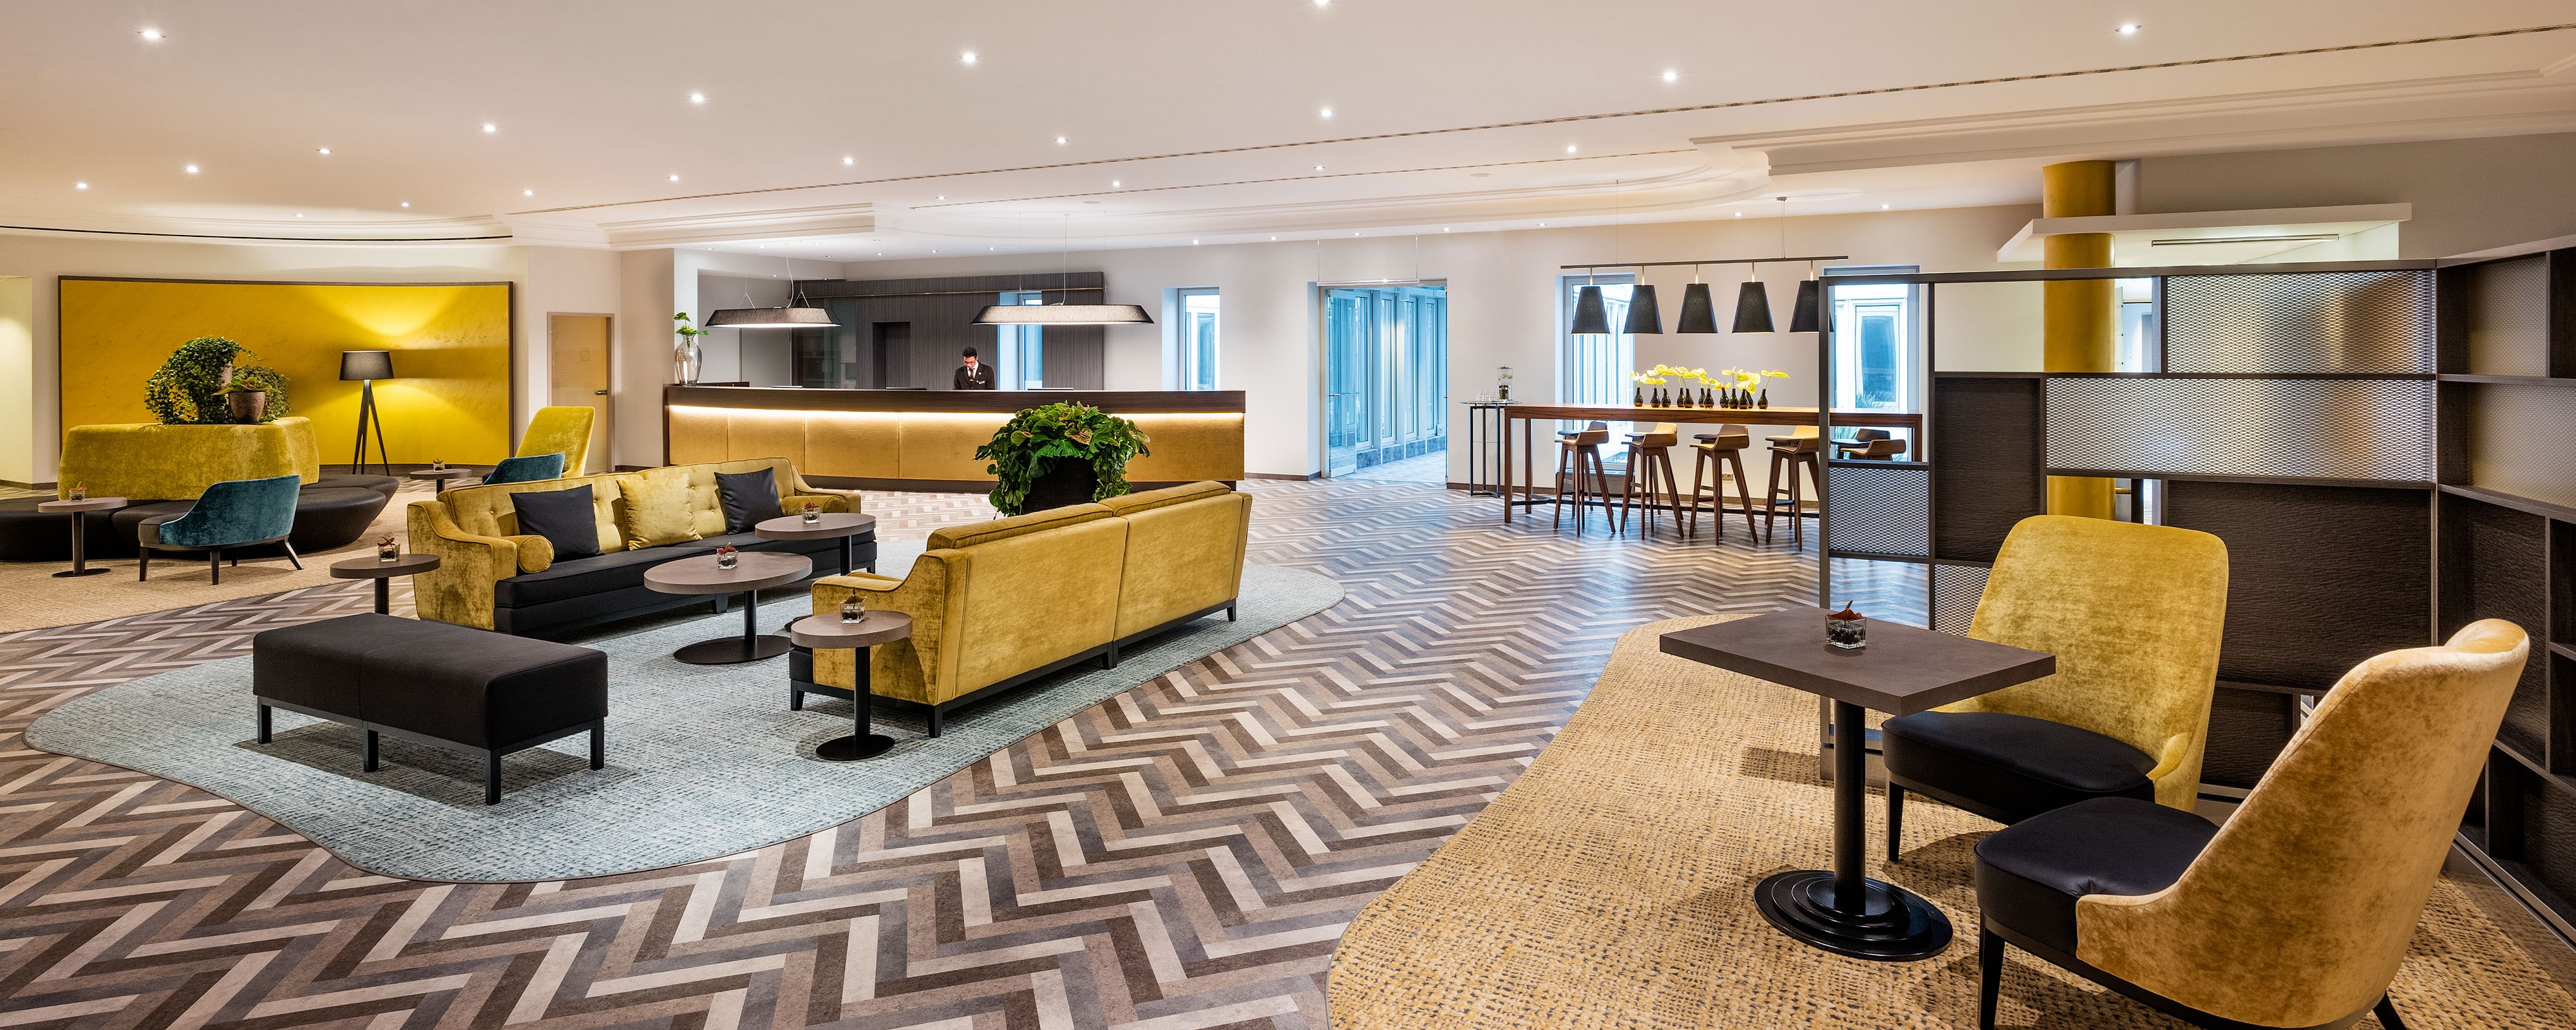 Image for Sheraton Duesseldorf Airport Hotel, a Marriott hotel.